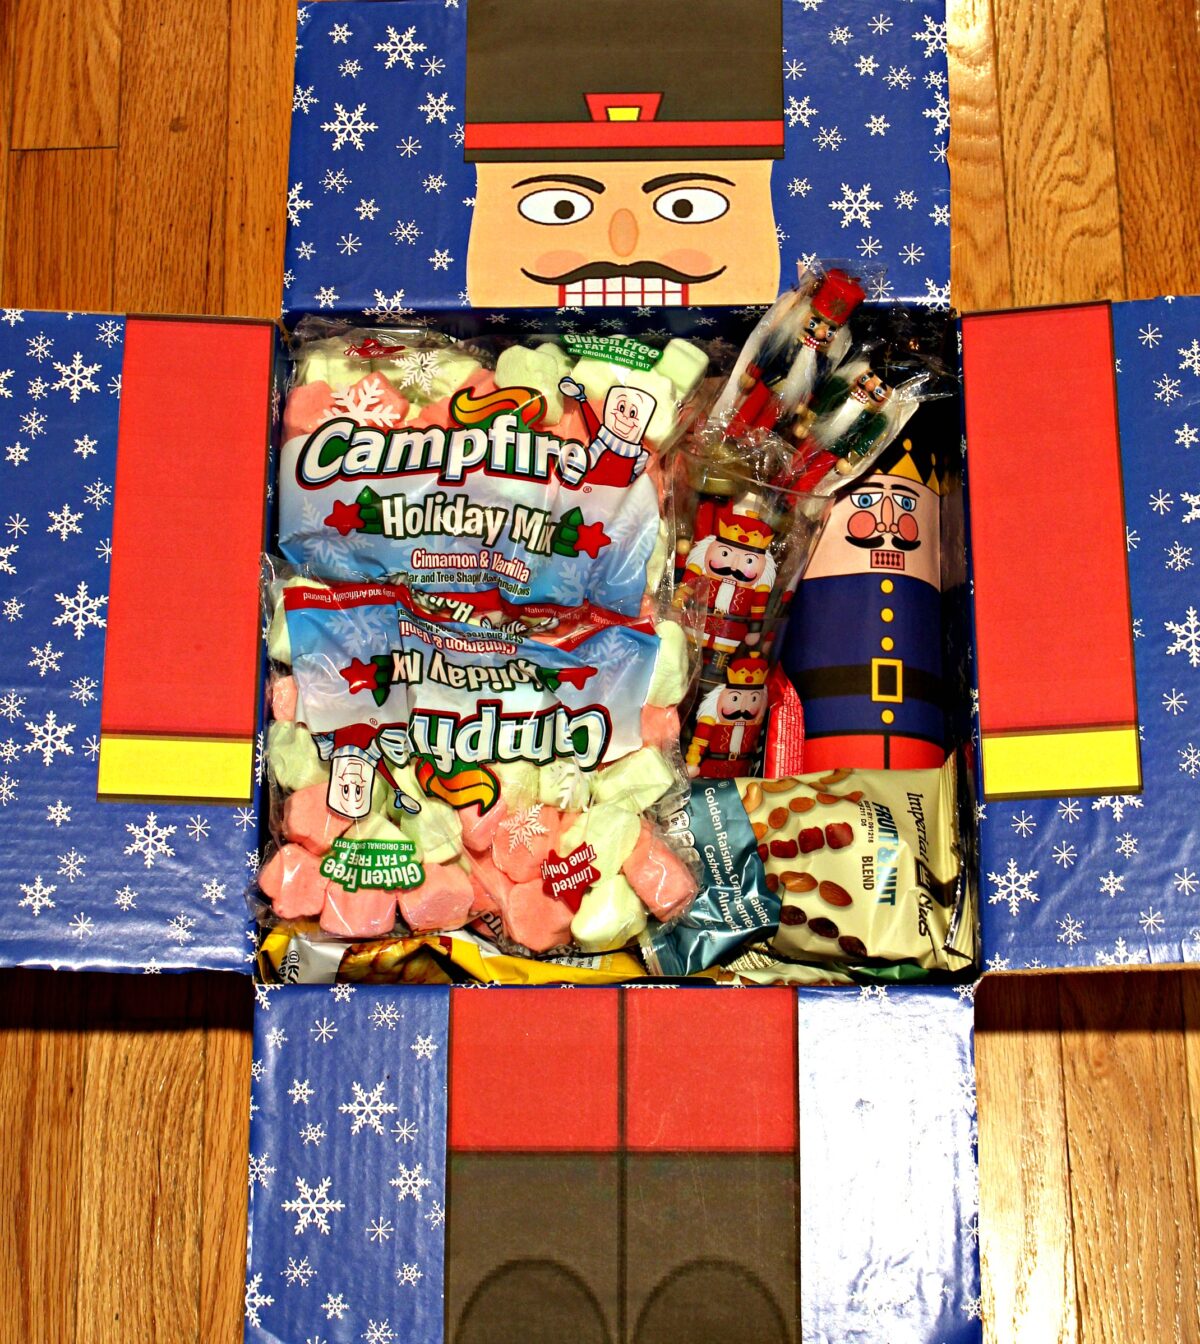 Nutcracker Care Package box decorated like a nutcracker soldier and filled with nutcracker themed items.